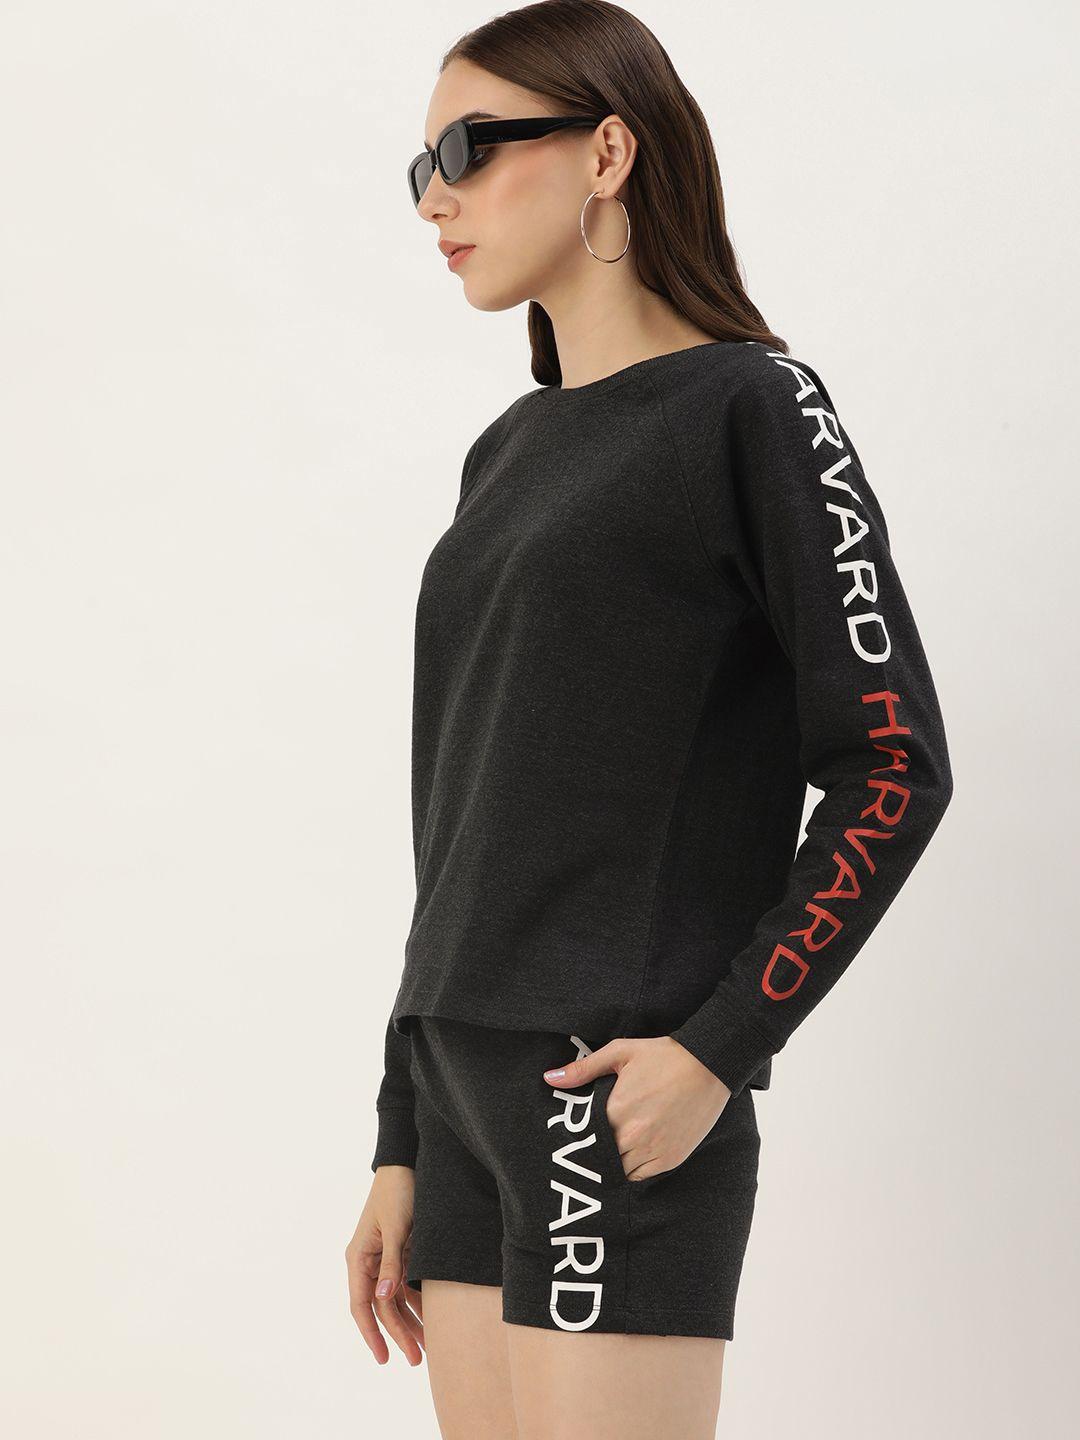 harvard typography printed t-shirt with shorts